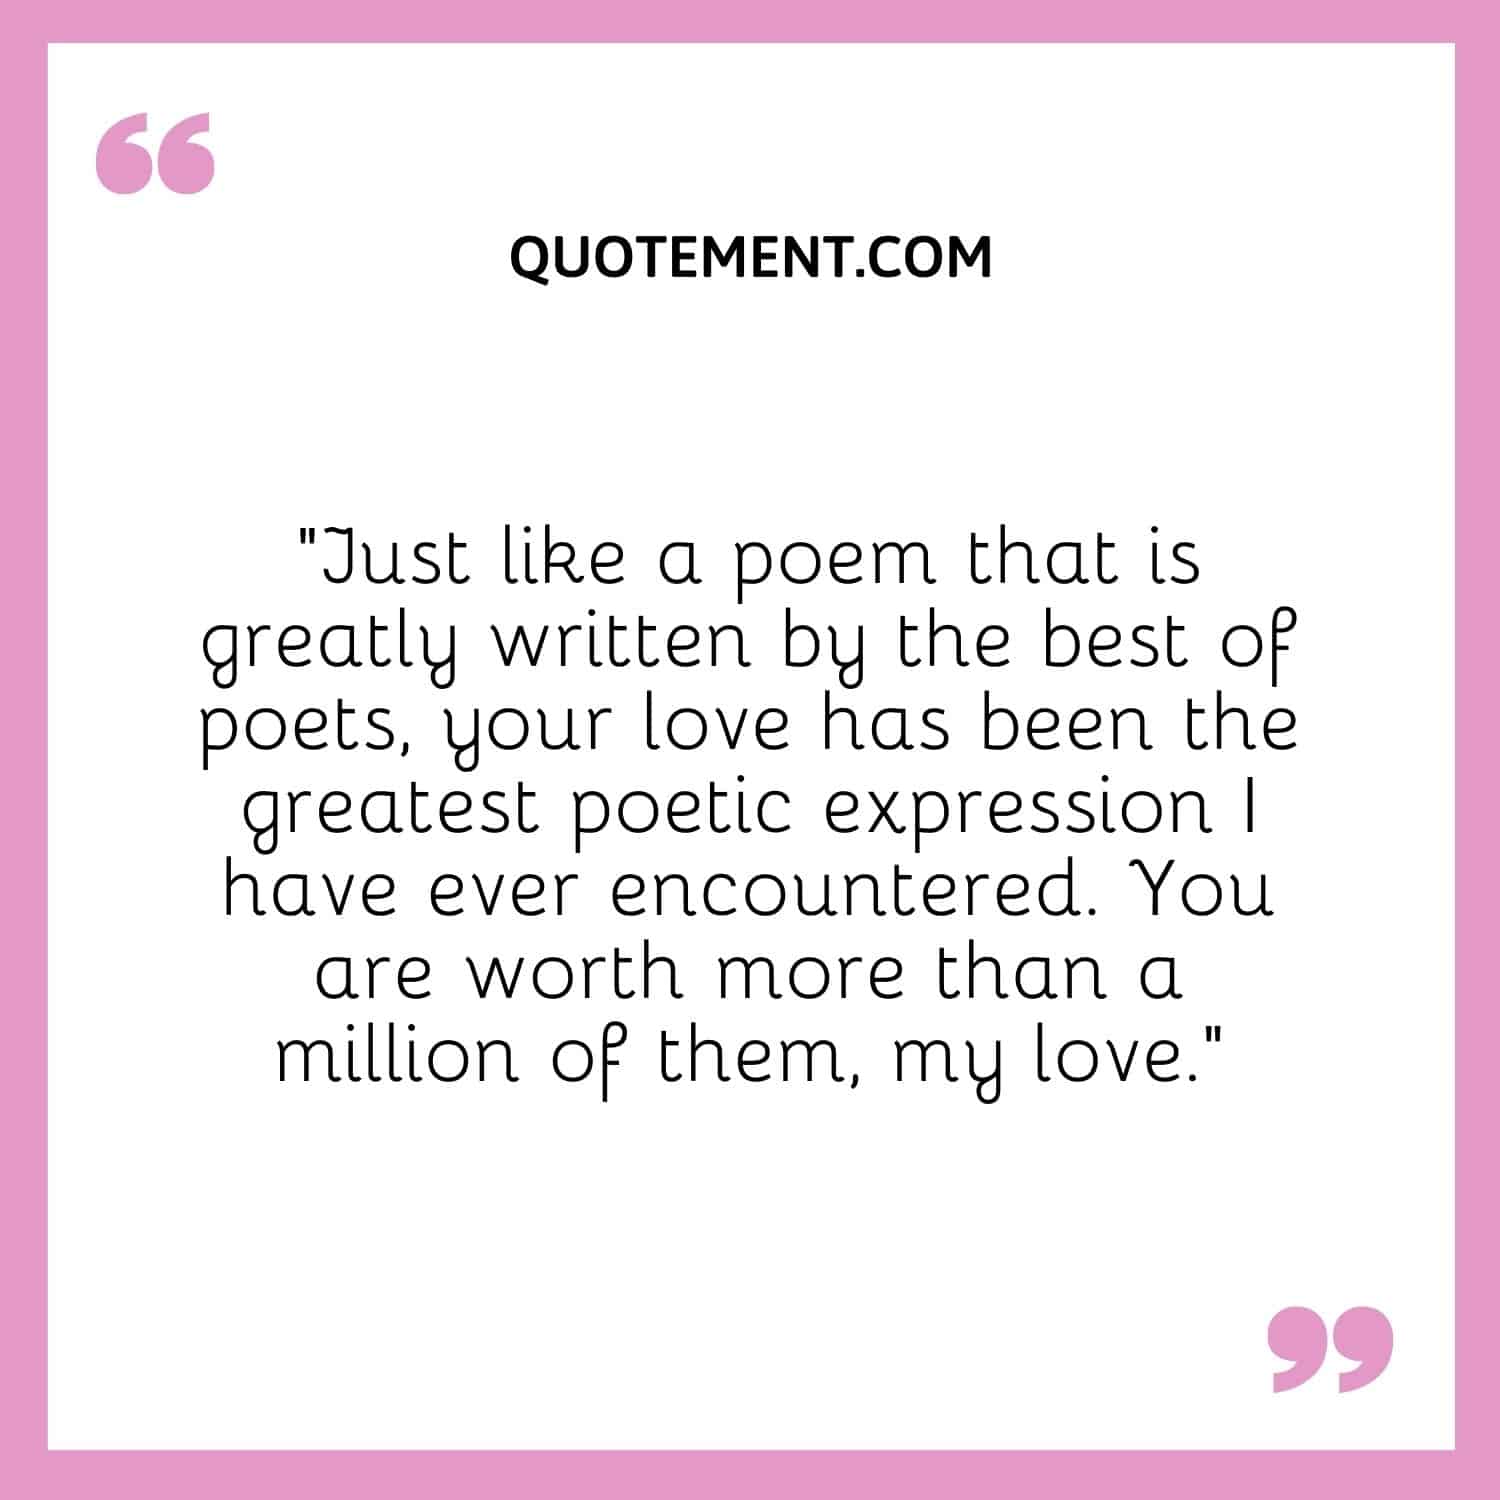 “Just like a poem that is greatly written by the best of poets, your love has been the greatest poetic expression I have ever encountered. You are worth more than a million of them, my love.”